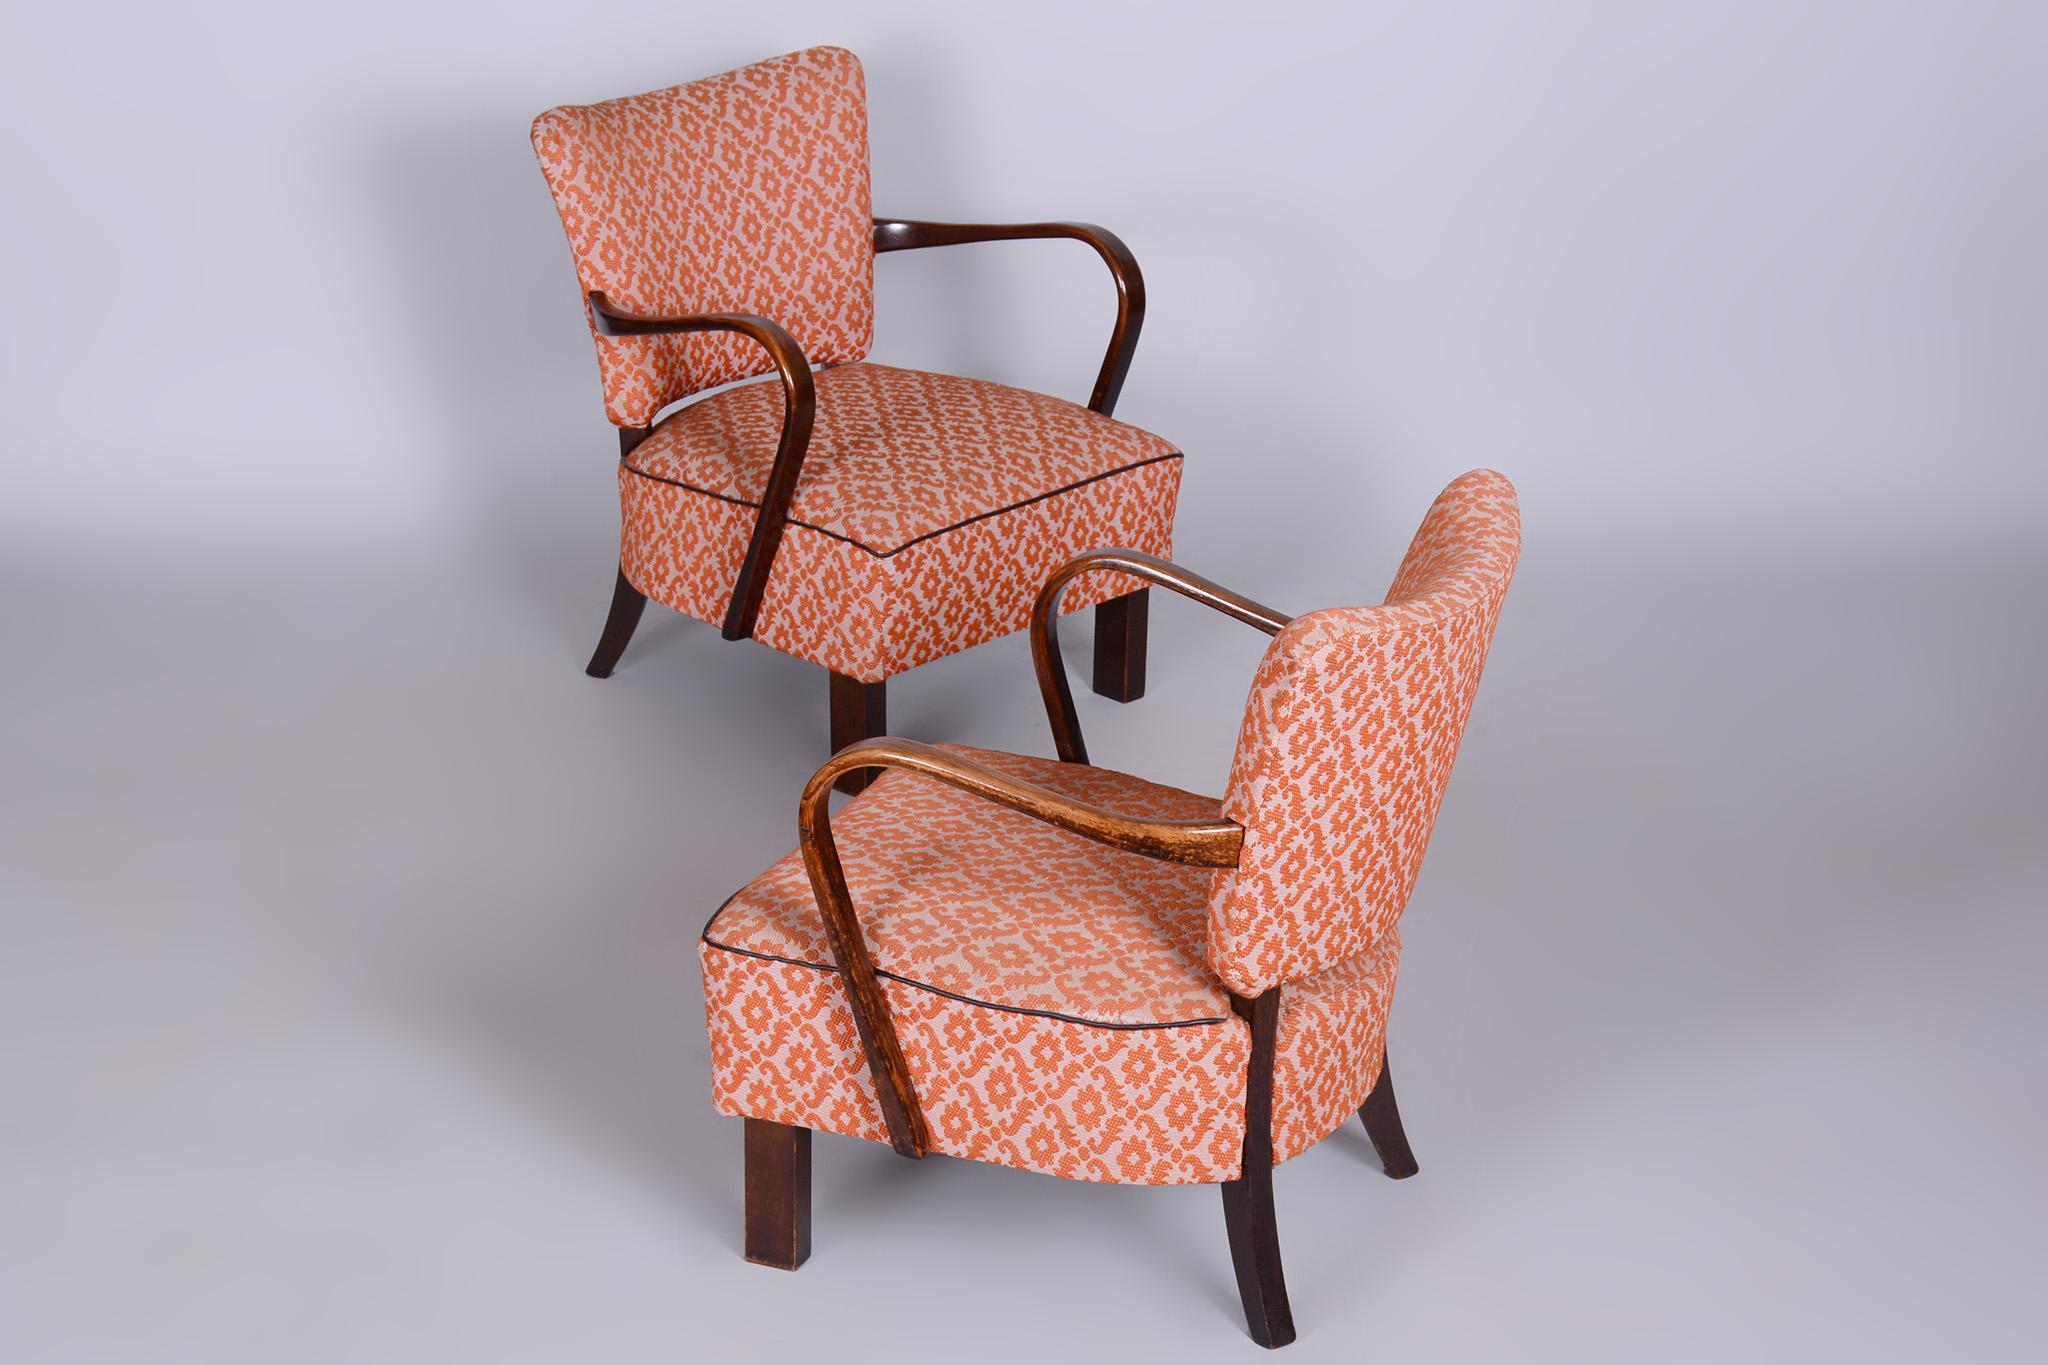 Pair of Beech Art Deco Armchairs Made in 1930s, Czechia, Revived Polish For Sale 5